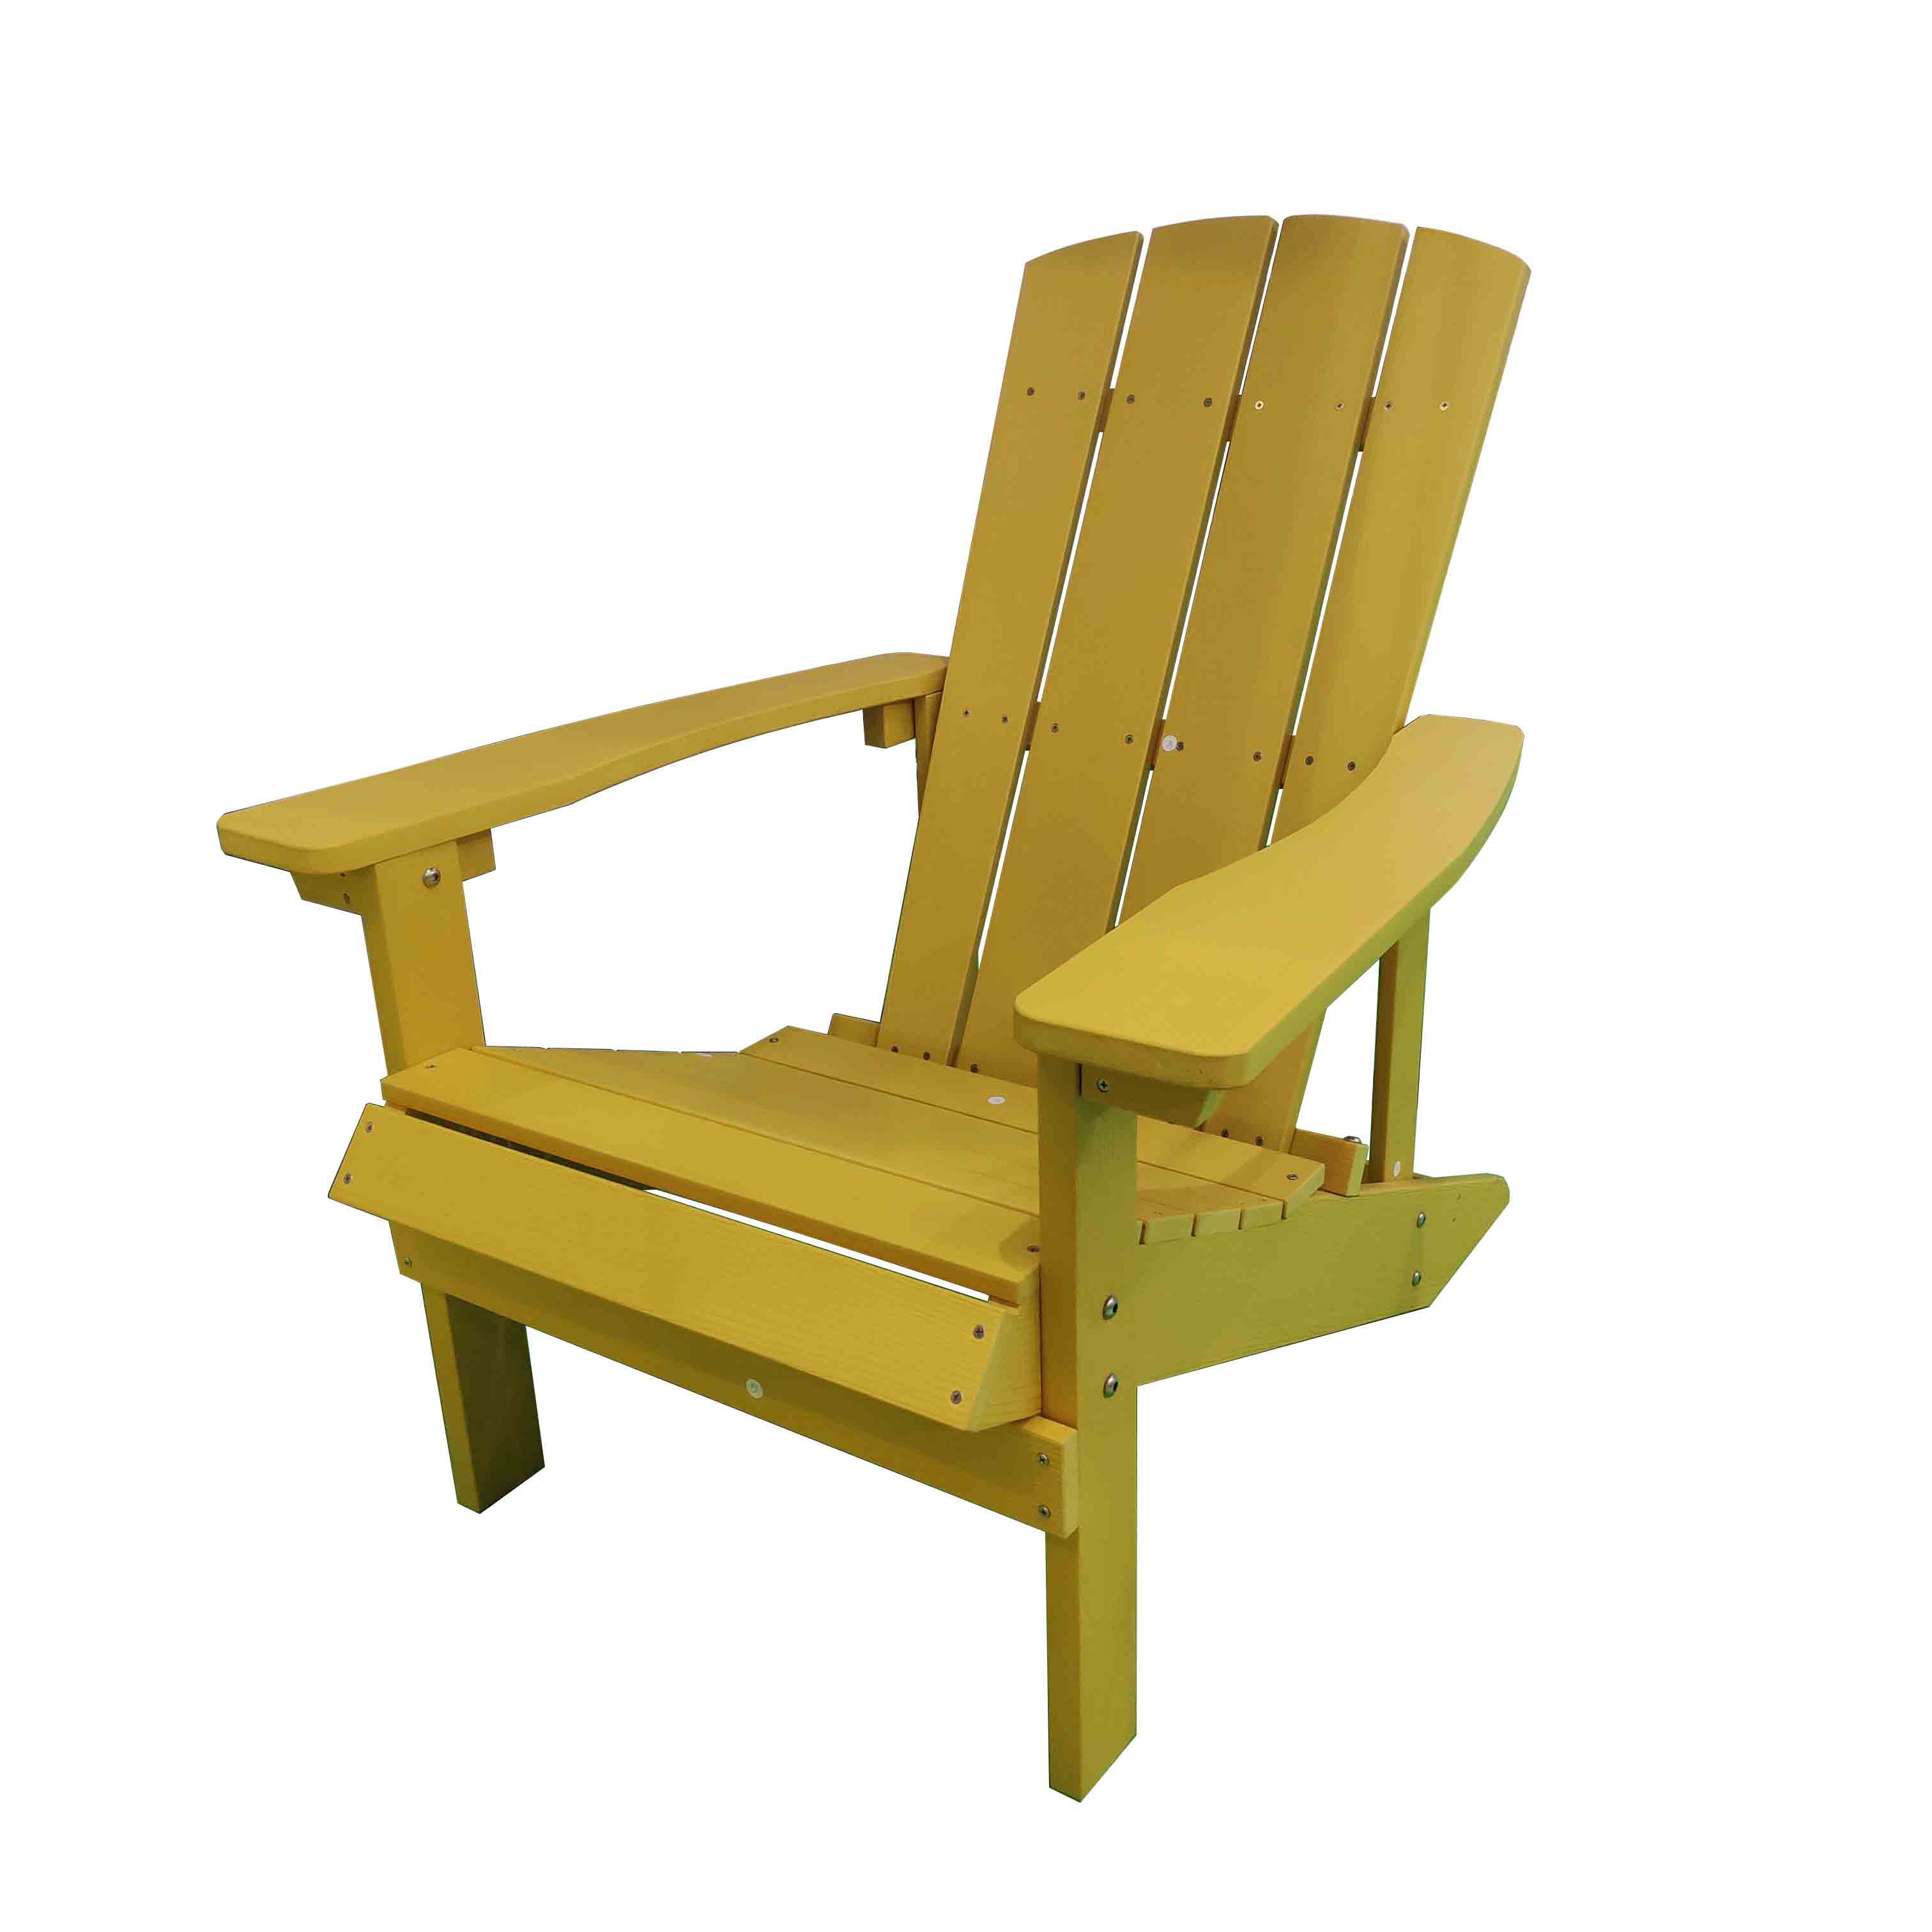 High Quality for Garden Conversation Set - JJ-C14501-YLW-GG PS wood Adirondack chair – Jin-jiang Industry